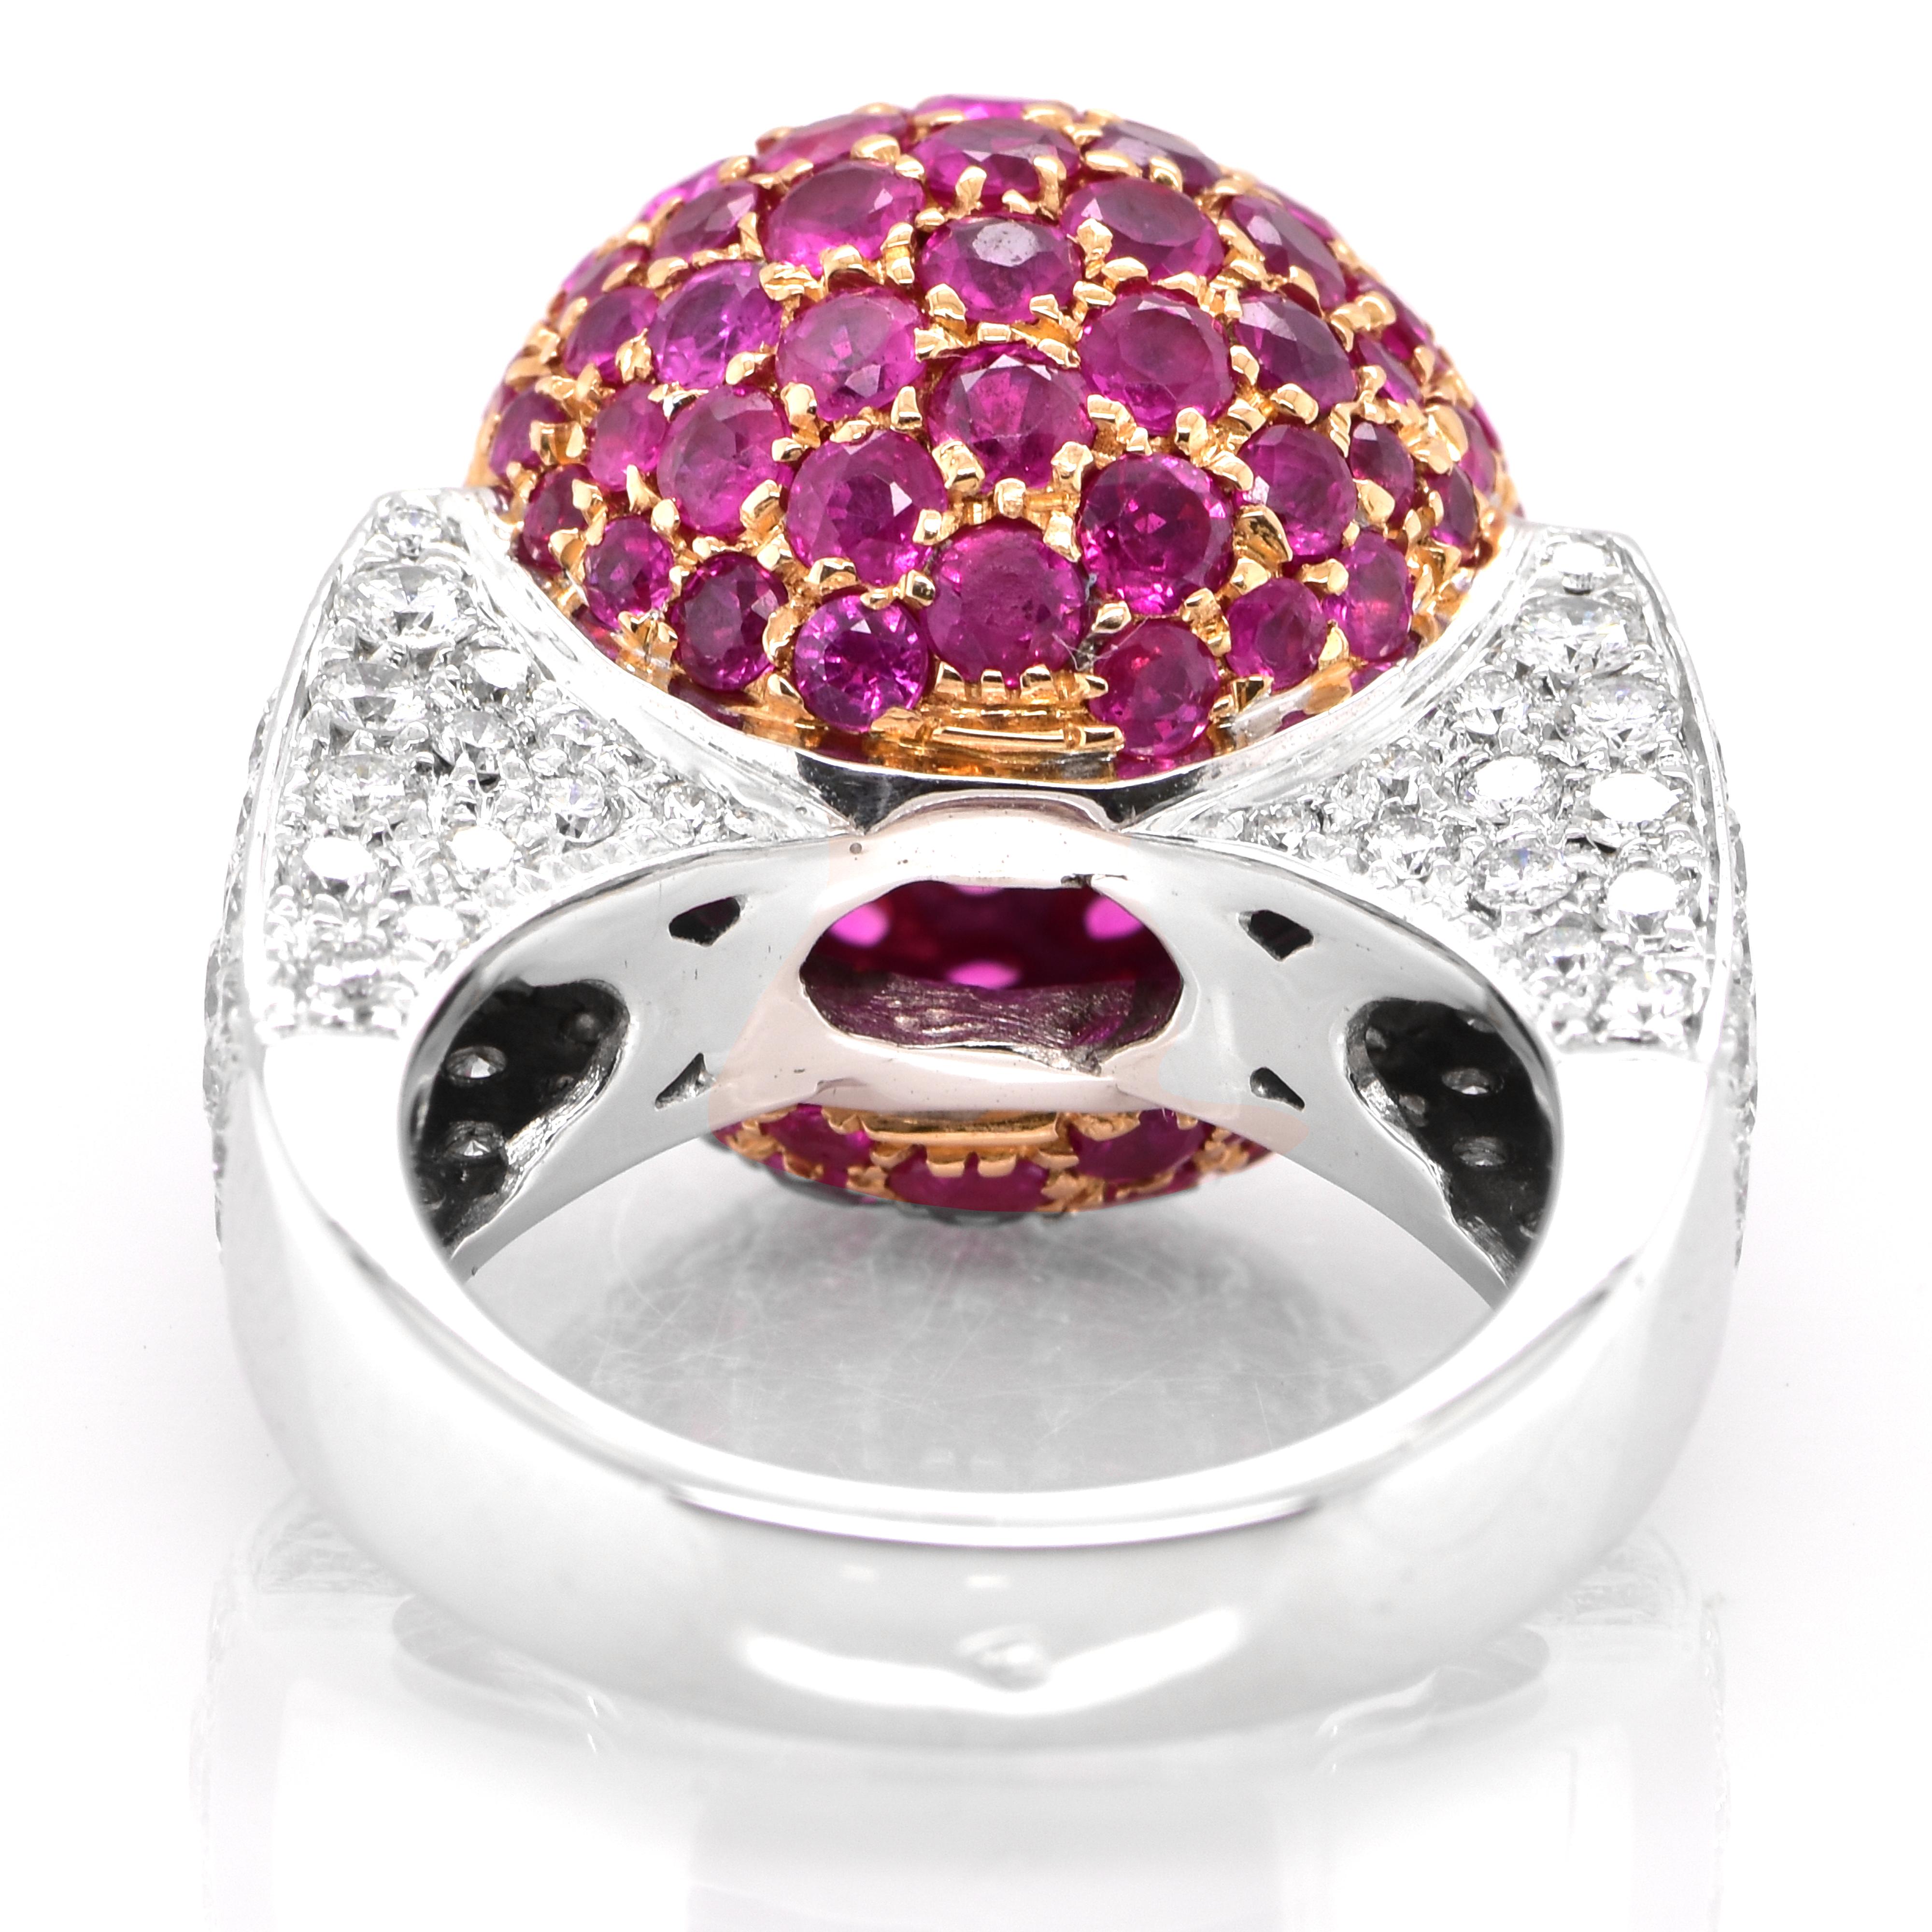 Women's 5.86 Carat Ruby and Diamond Cocktail Ring Made in 18 Karat Gold For Sale